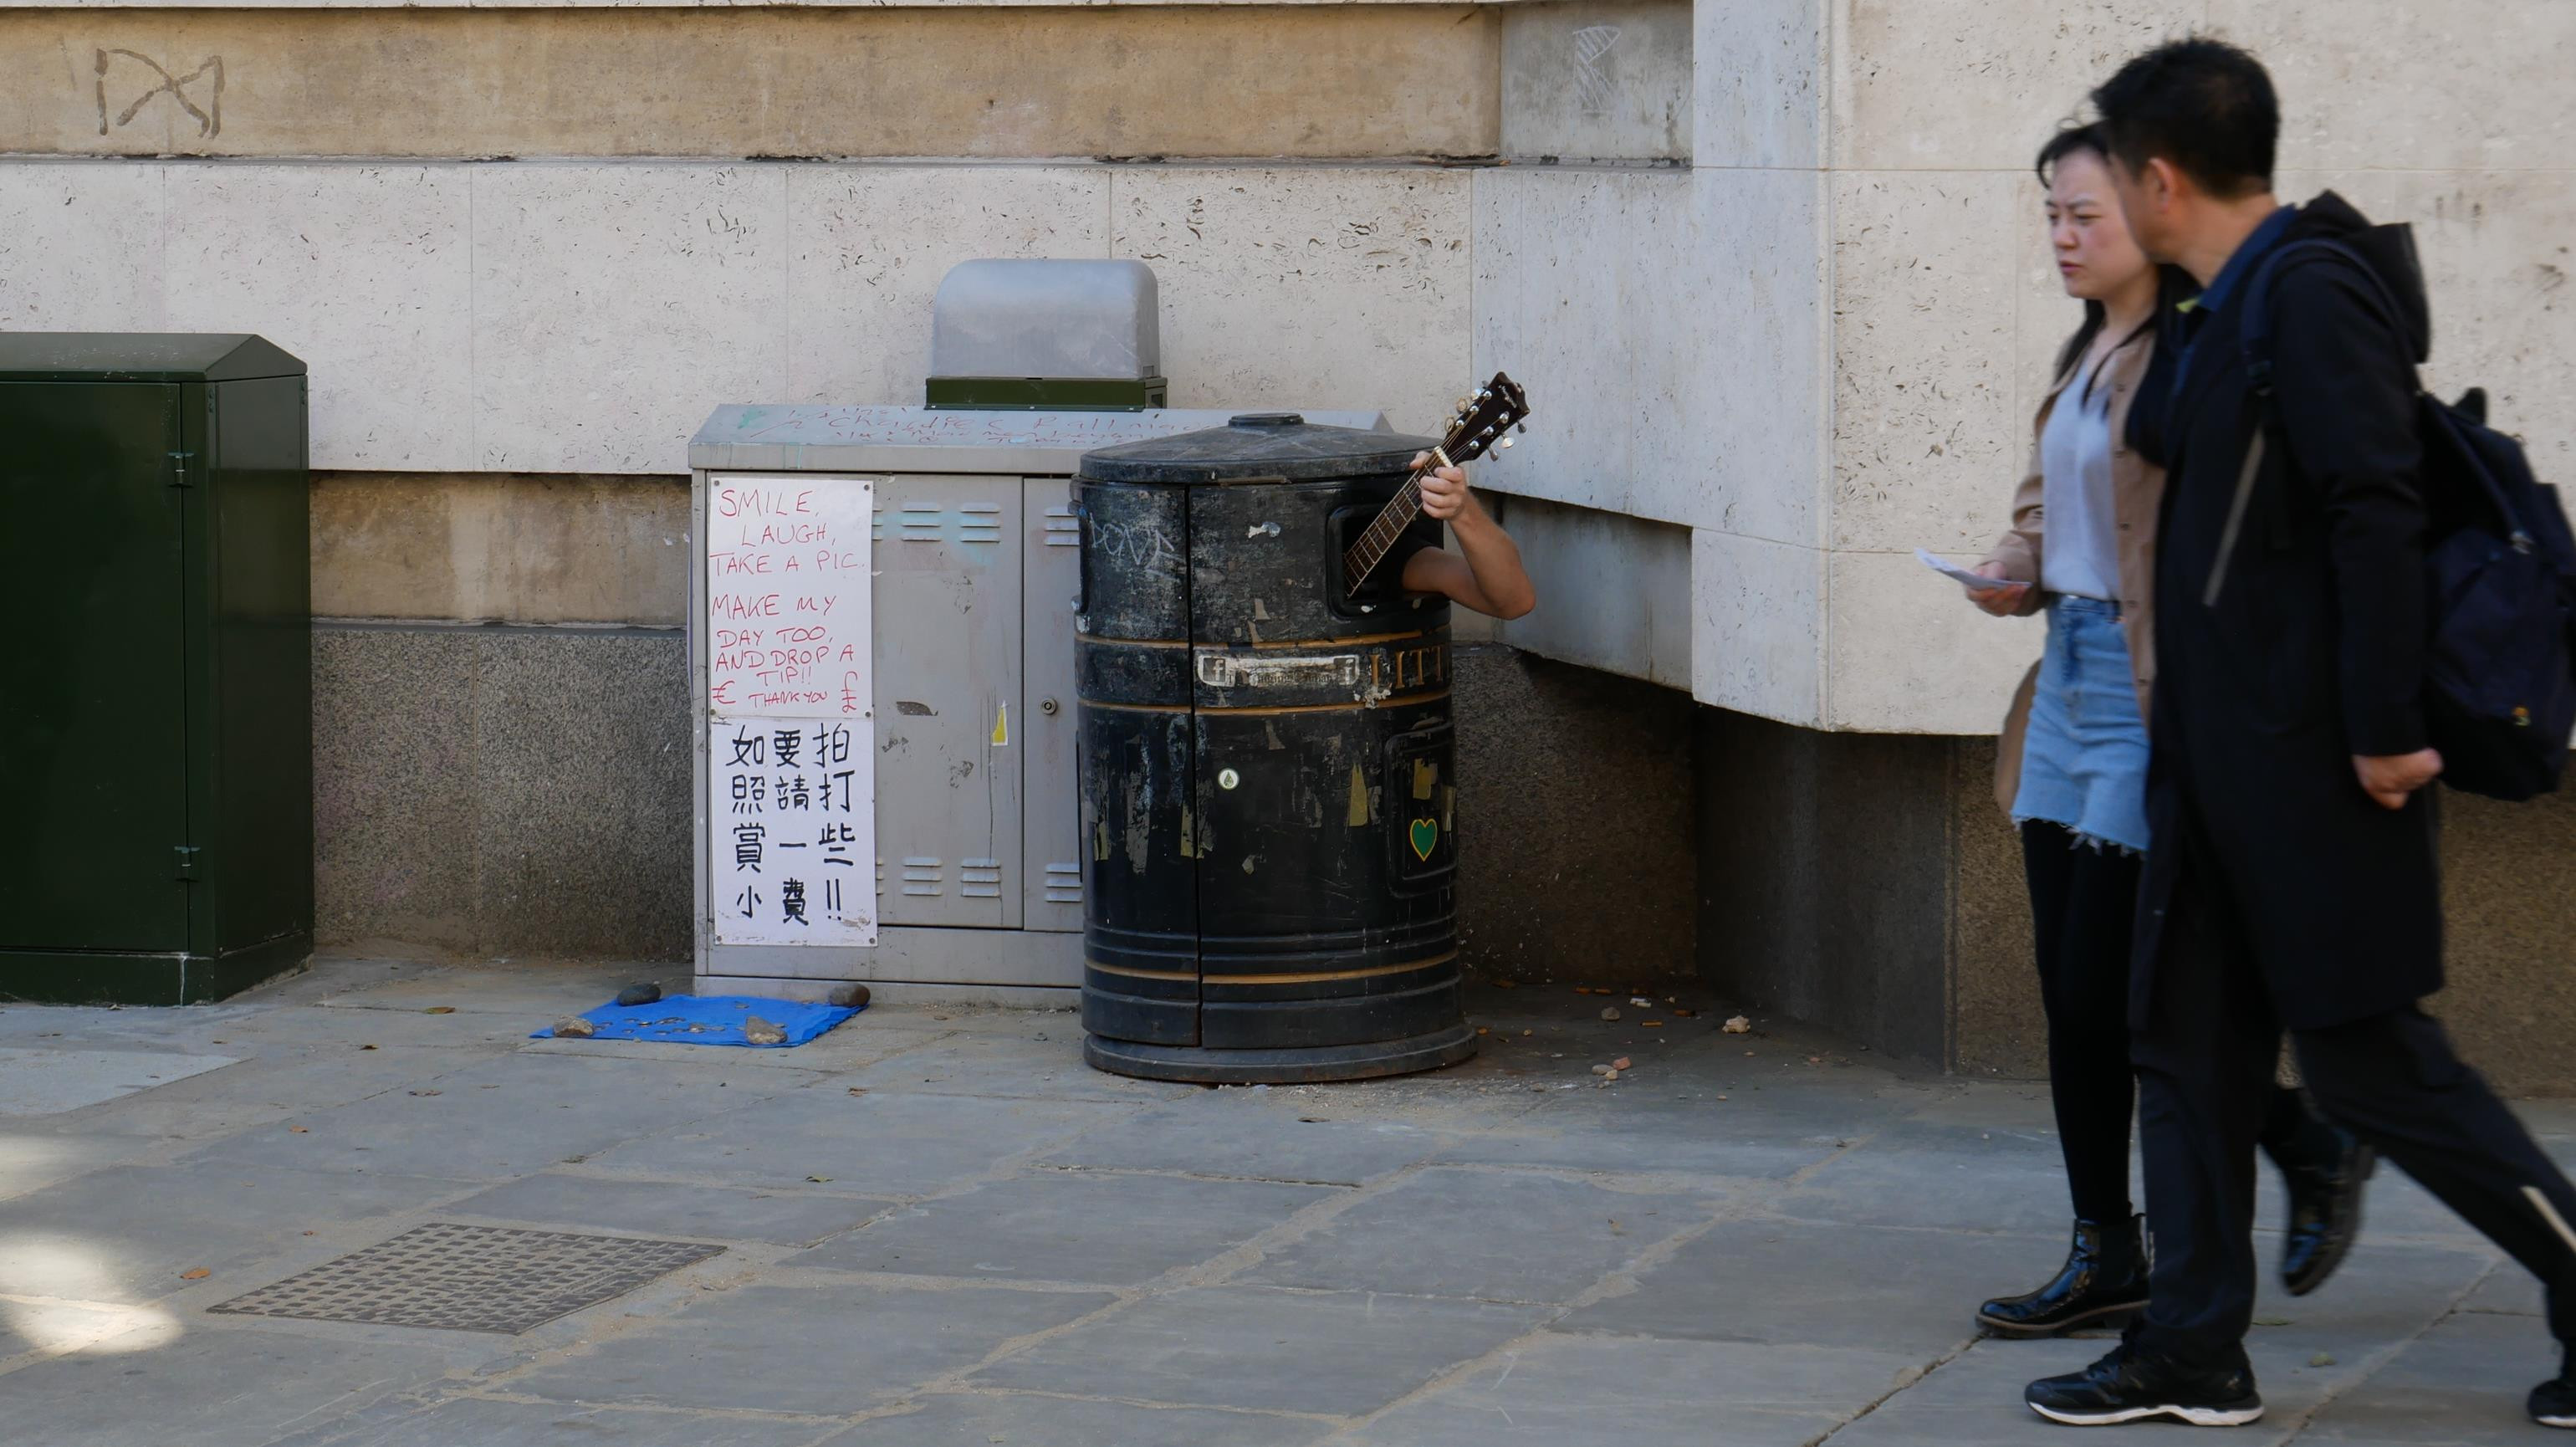 This Cambridge busker was light relief after all the serious history